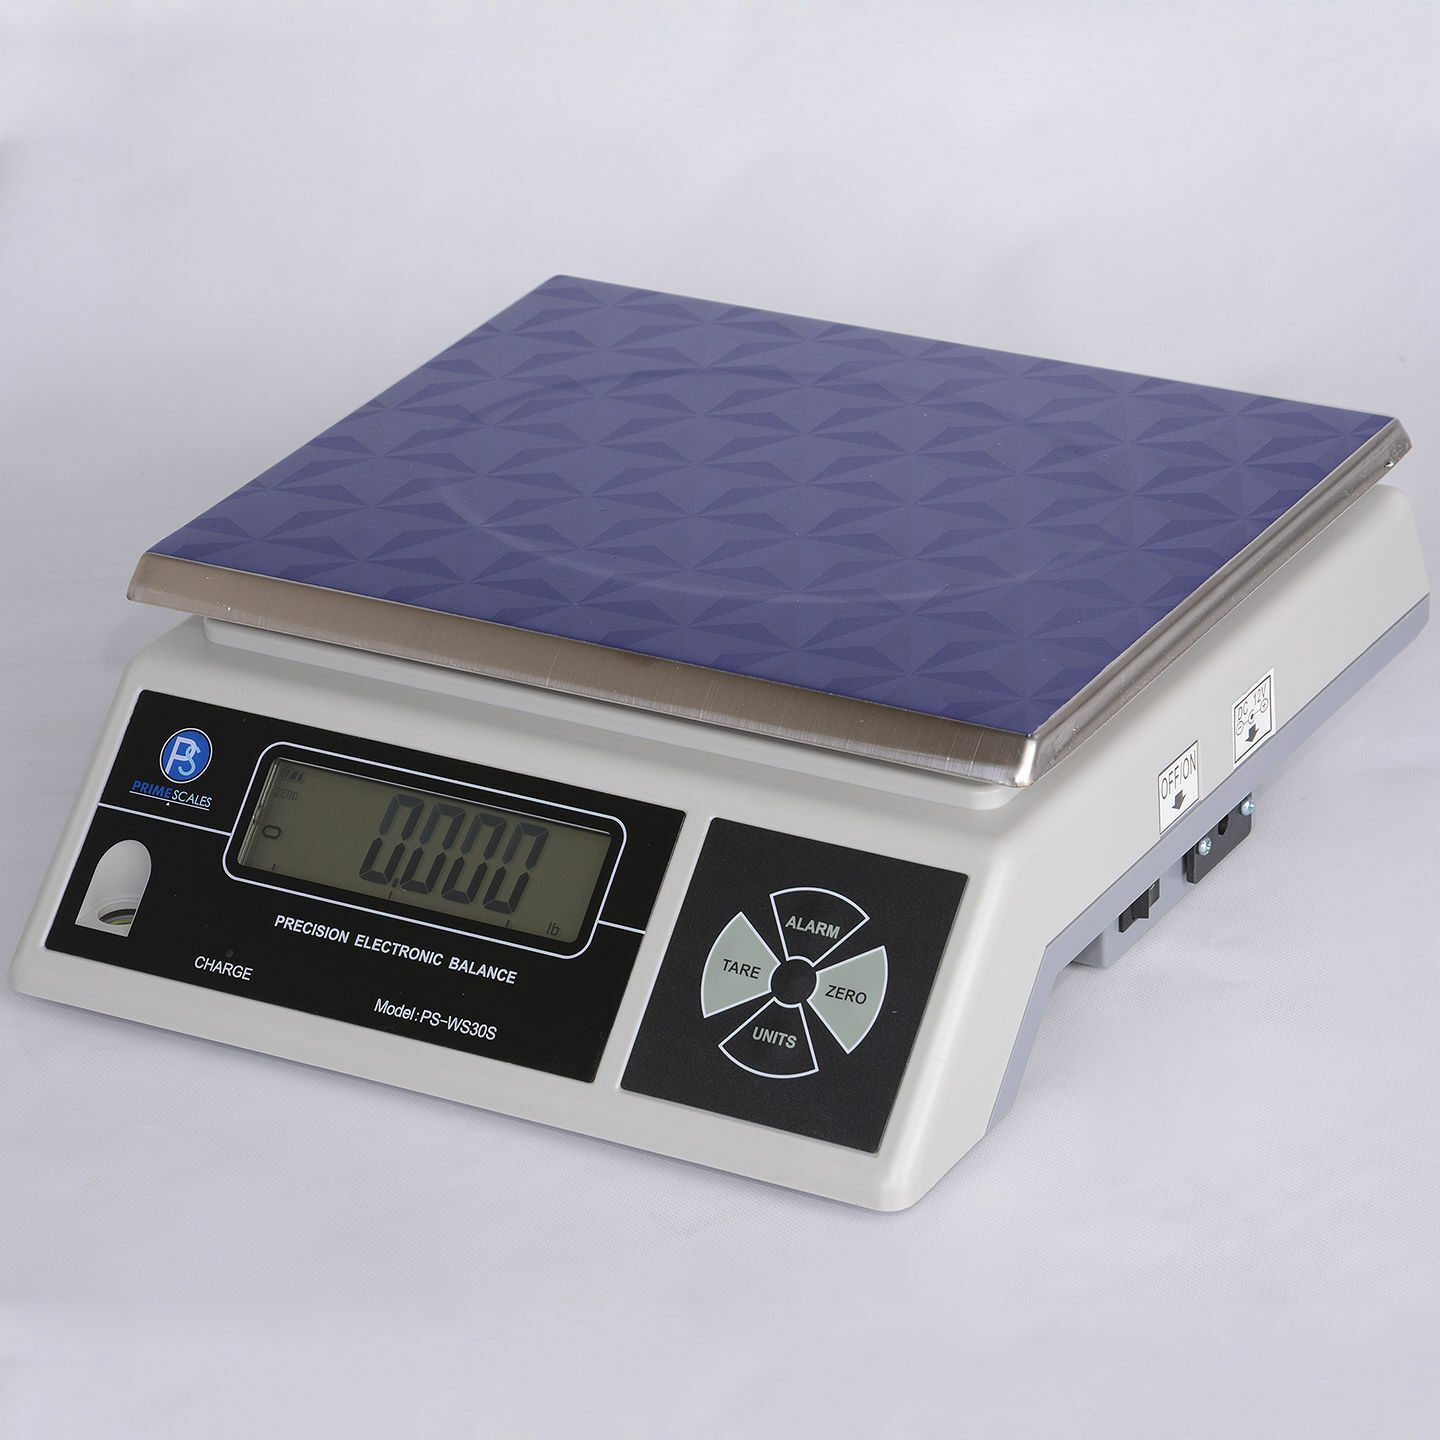 discount deals with free shipping Weighing Scale Balance ...